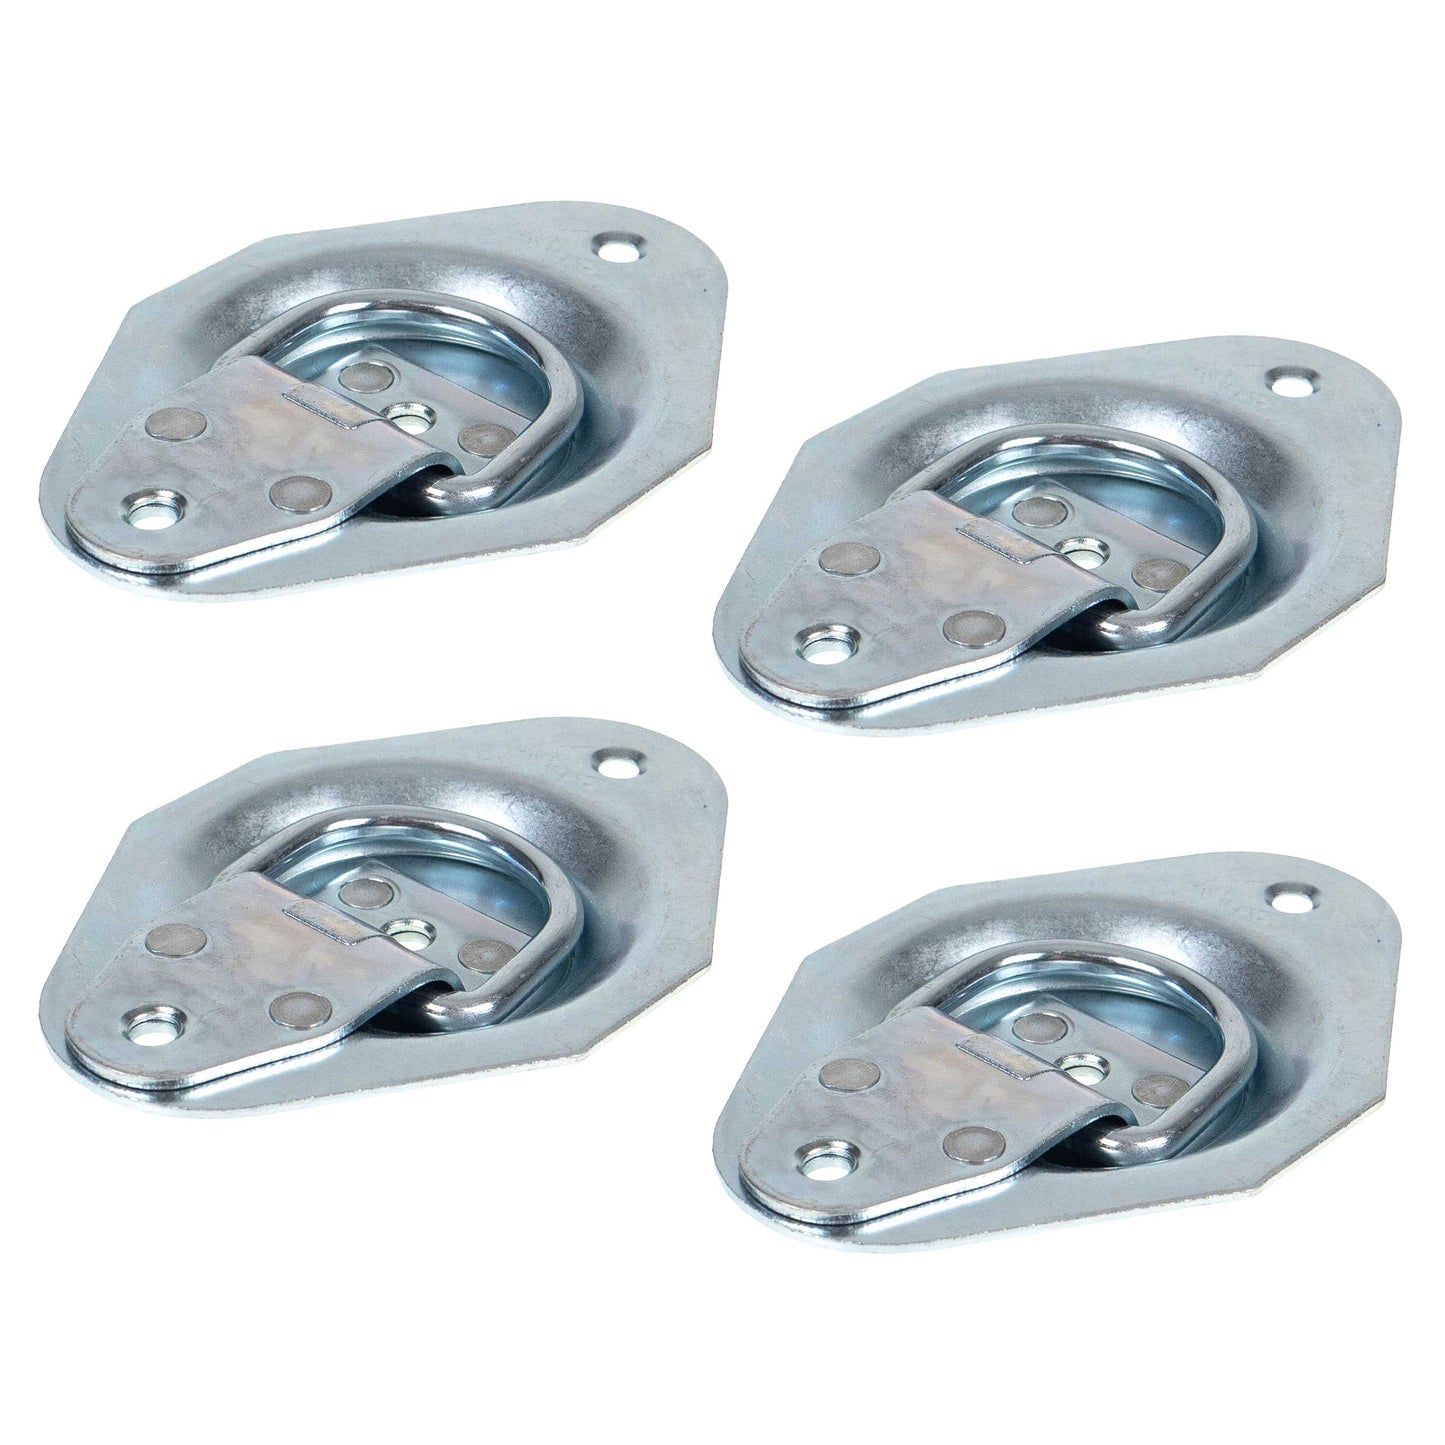 4-Pack Zinc Plated Recessed Mounting Ring - 300 lbs